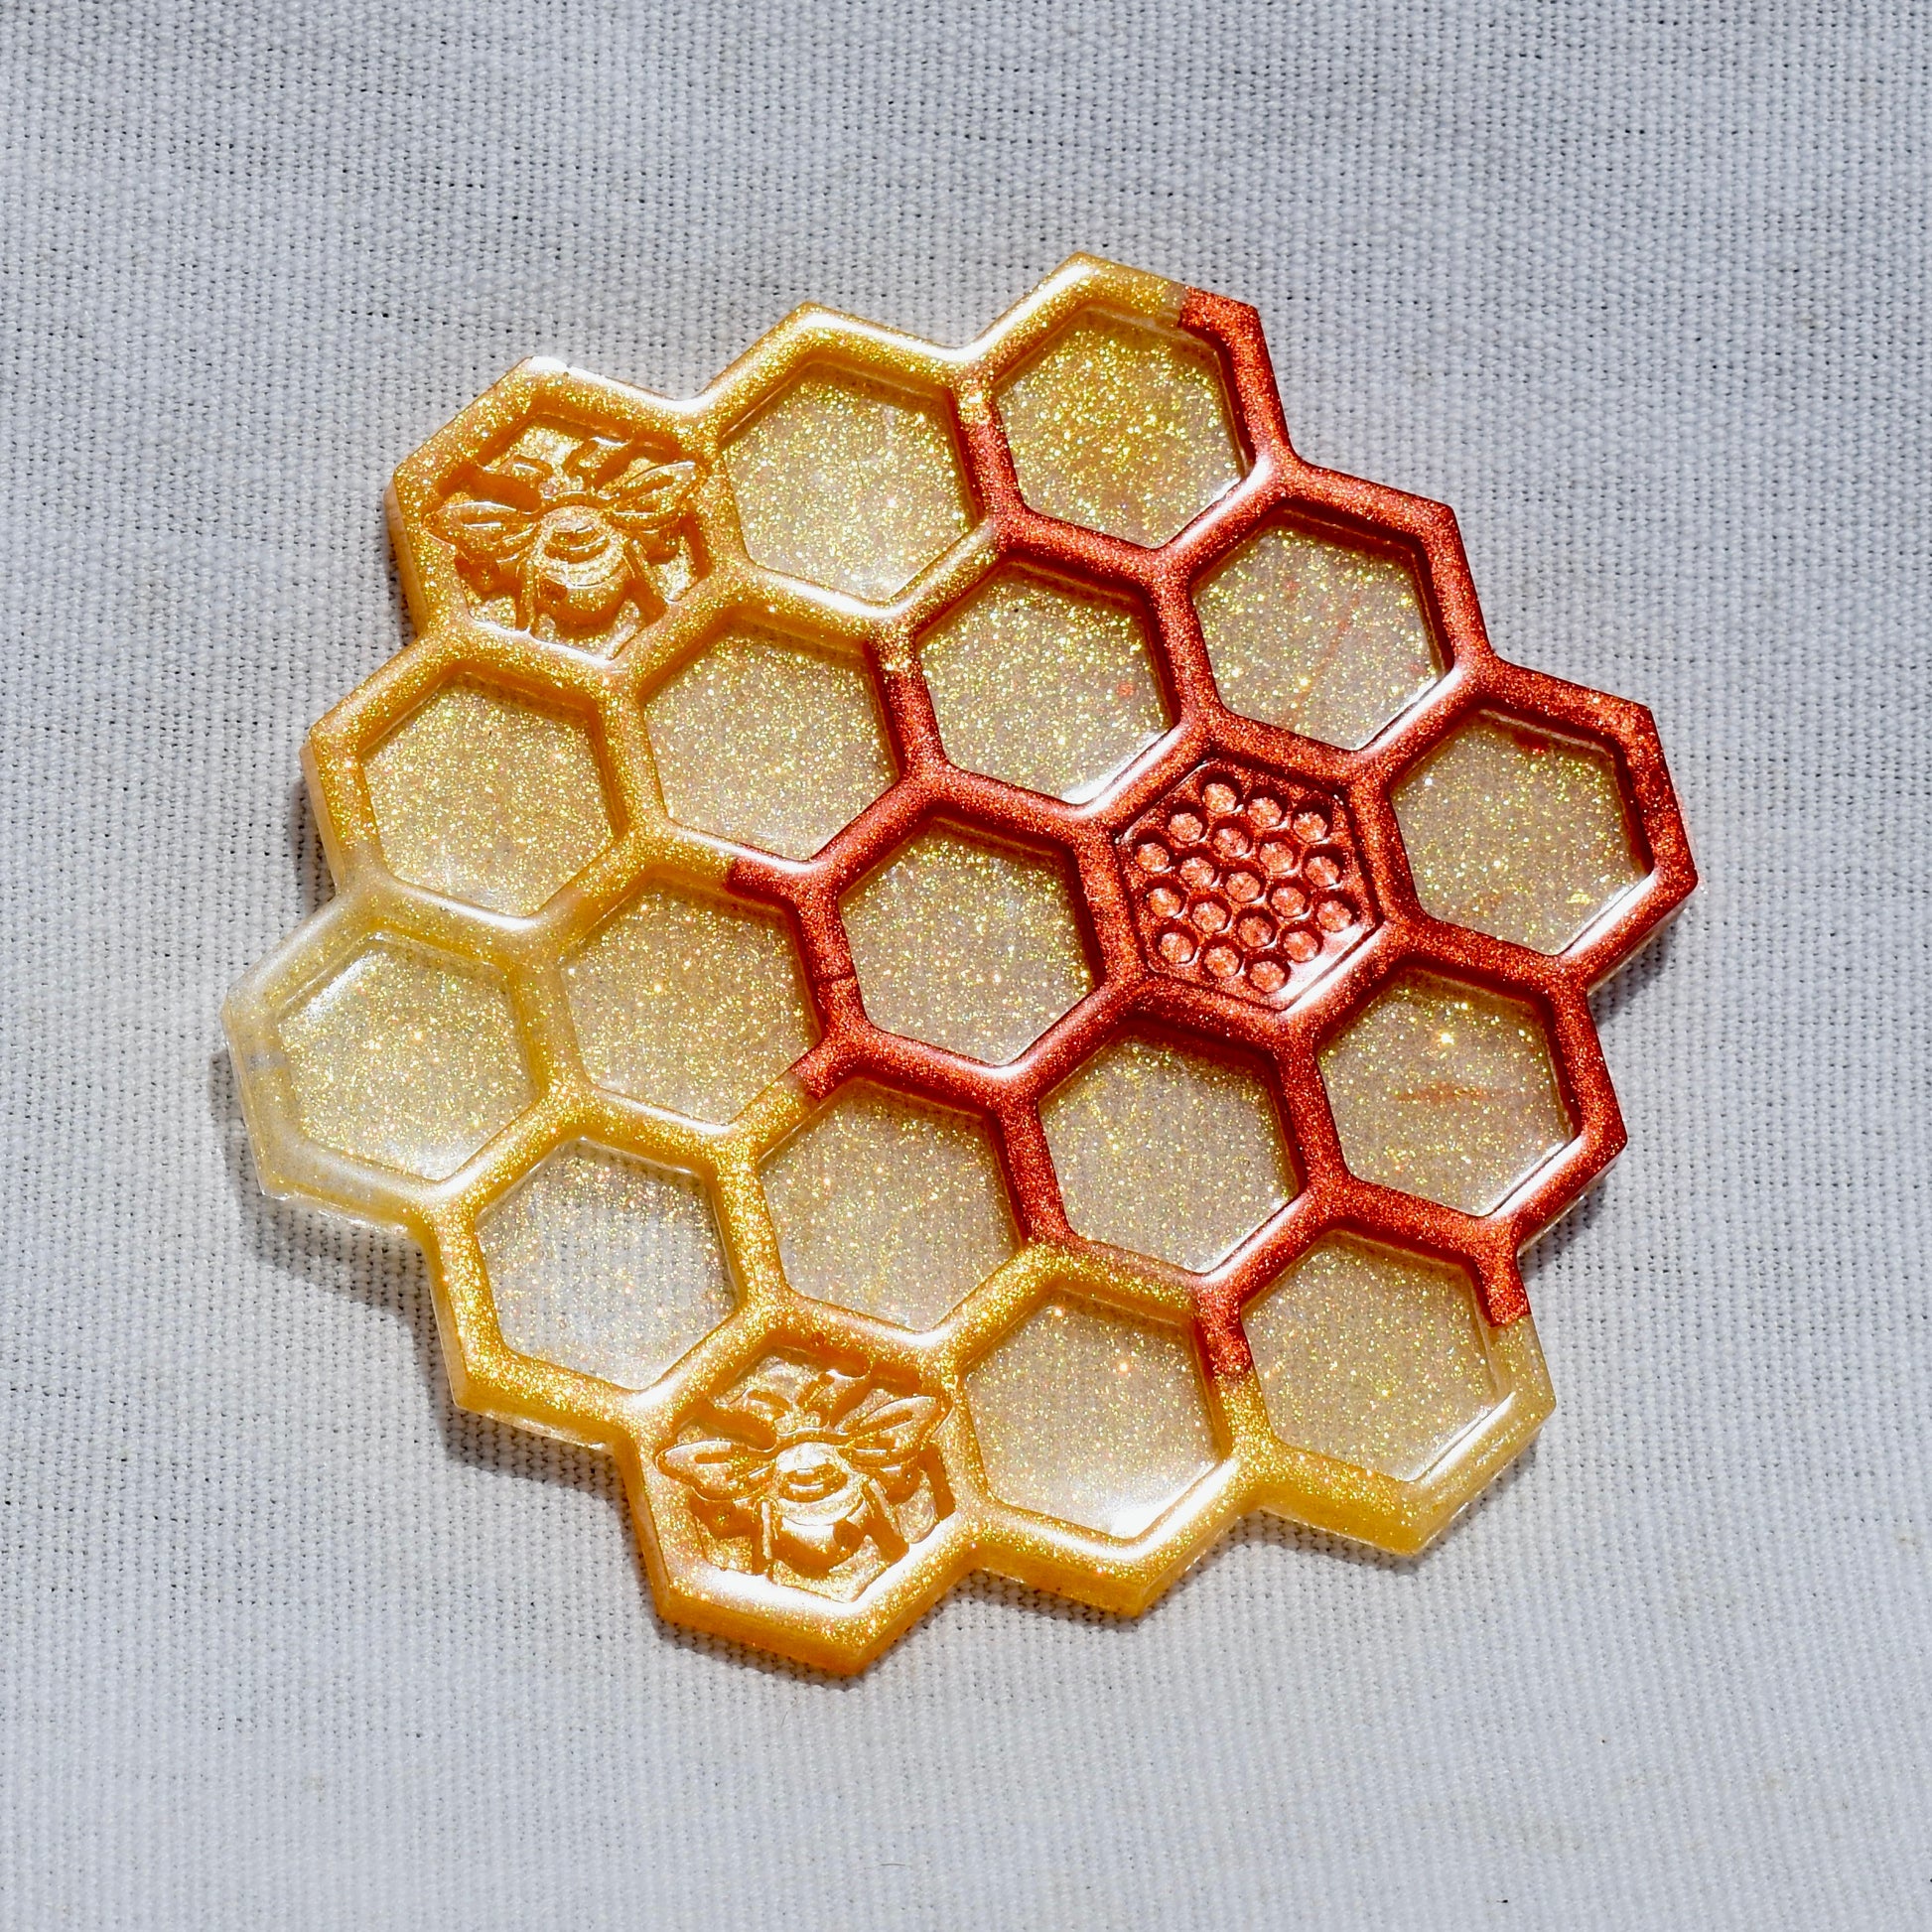 Charming cottage style honey bee resin coaster 5 piece set with